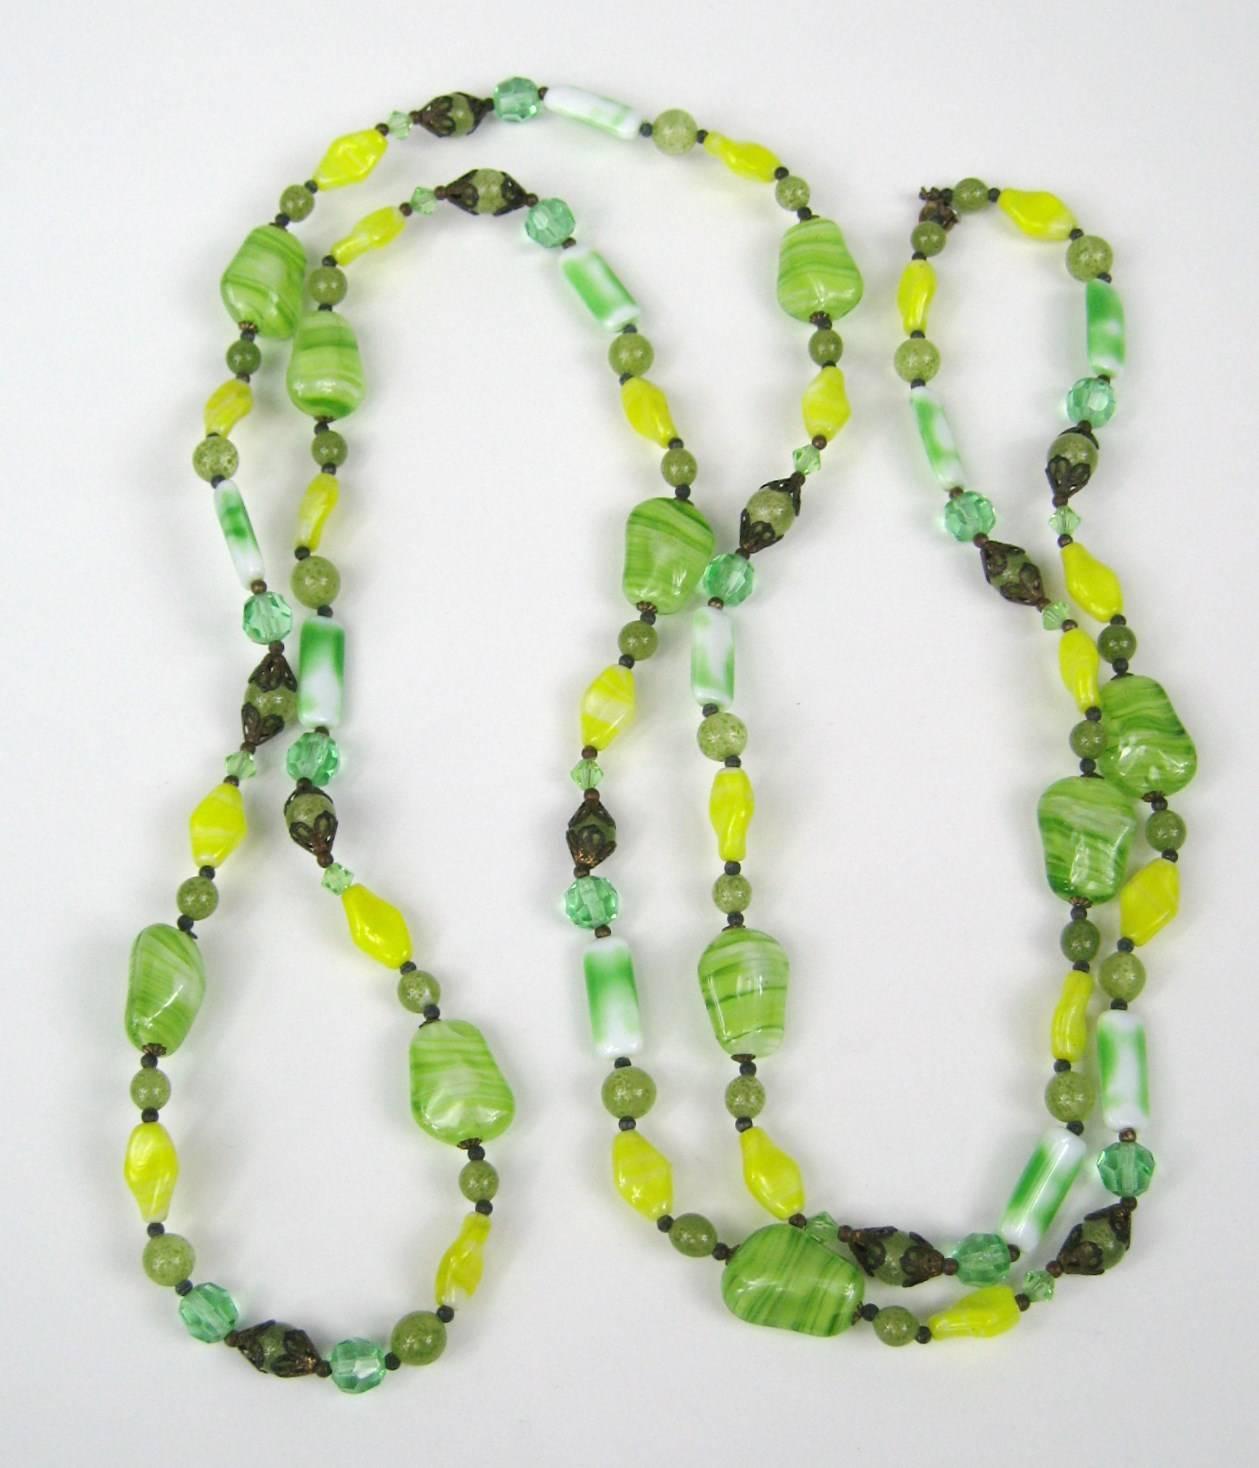 Stunning Greens and yellow beads. Long strand measuring 48 in end to end. Glass beads range in size from .78 in down to .25 in. Faceted as well, with metal end caps on them.This is out of a massive collection of Hopi, Zuni, Navajo, Southwestern,